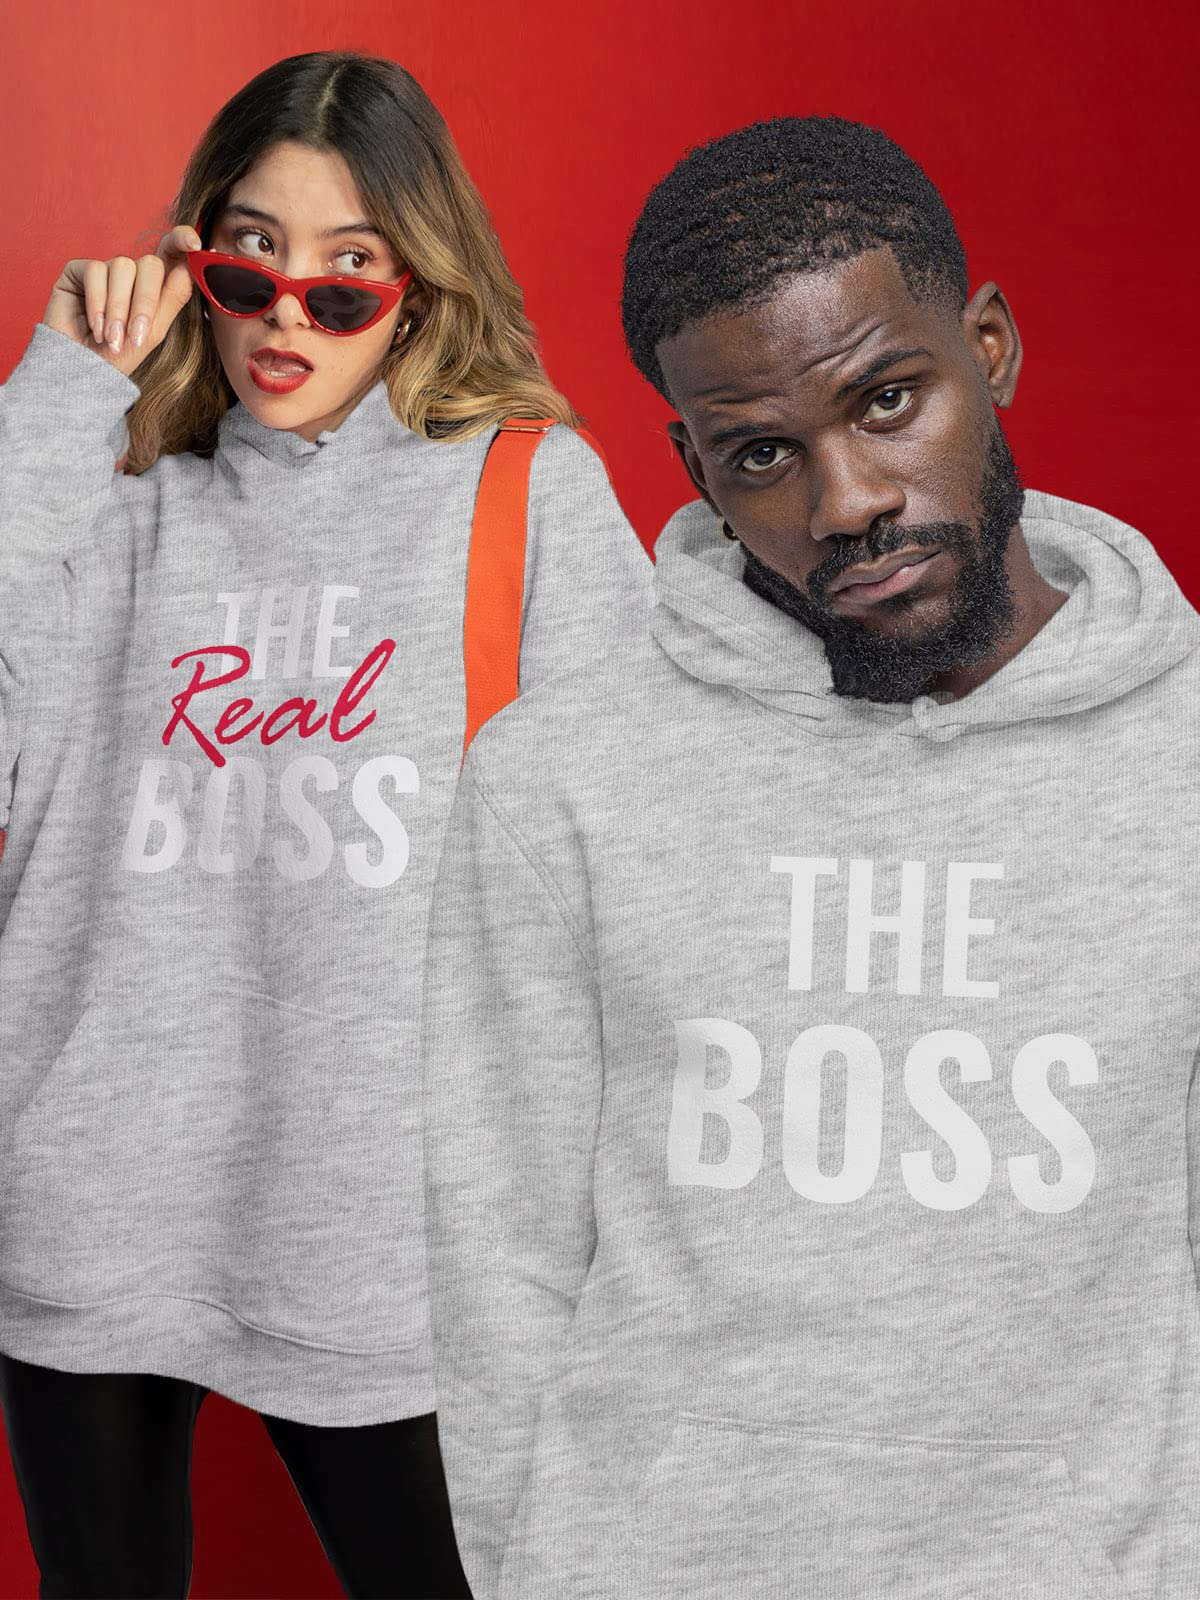 The Boss & The Real Boss Matching Hoodies for Couples His and Hers Hoodie Set